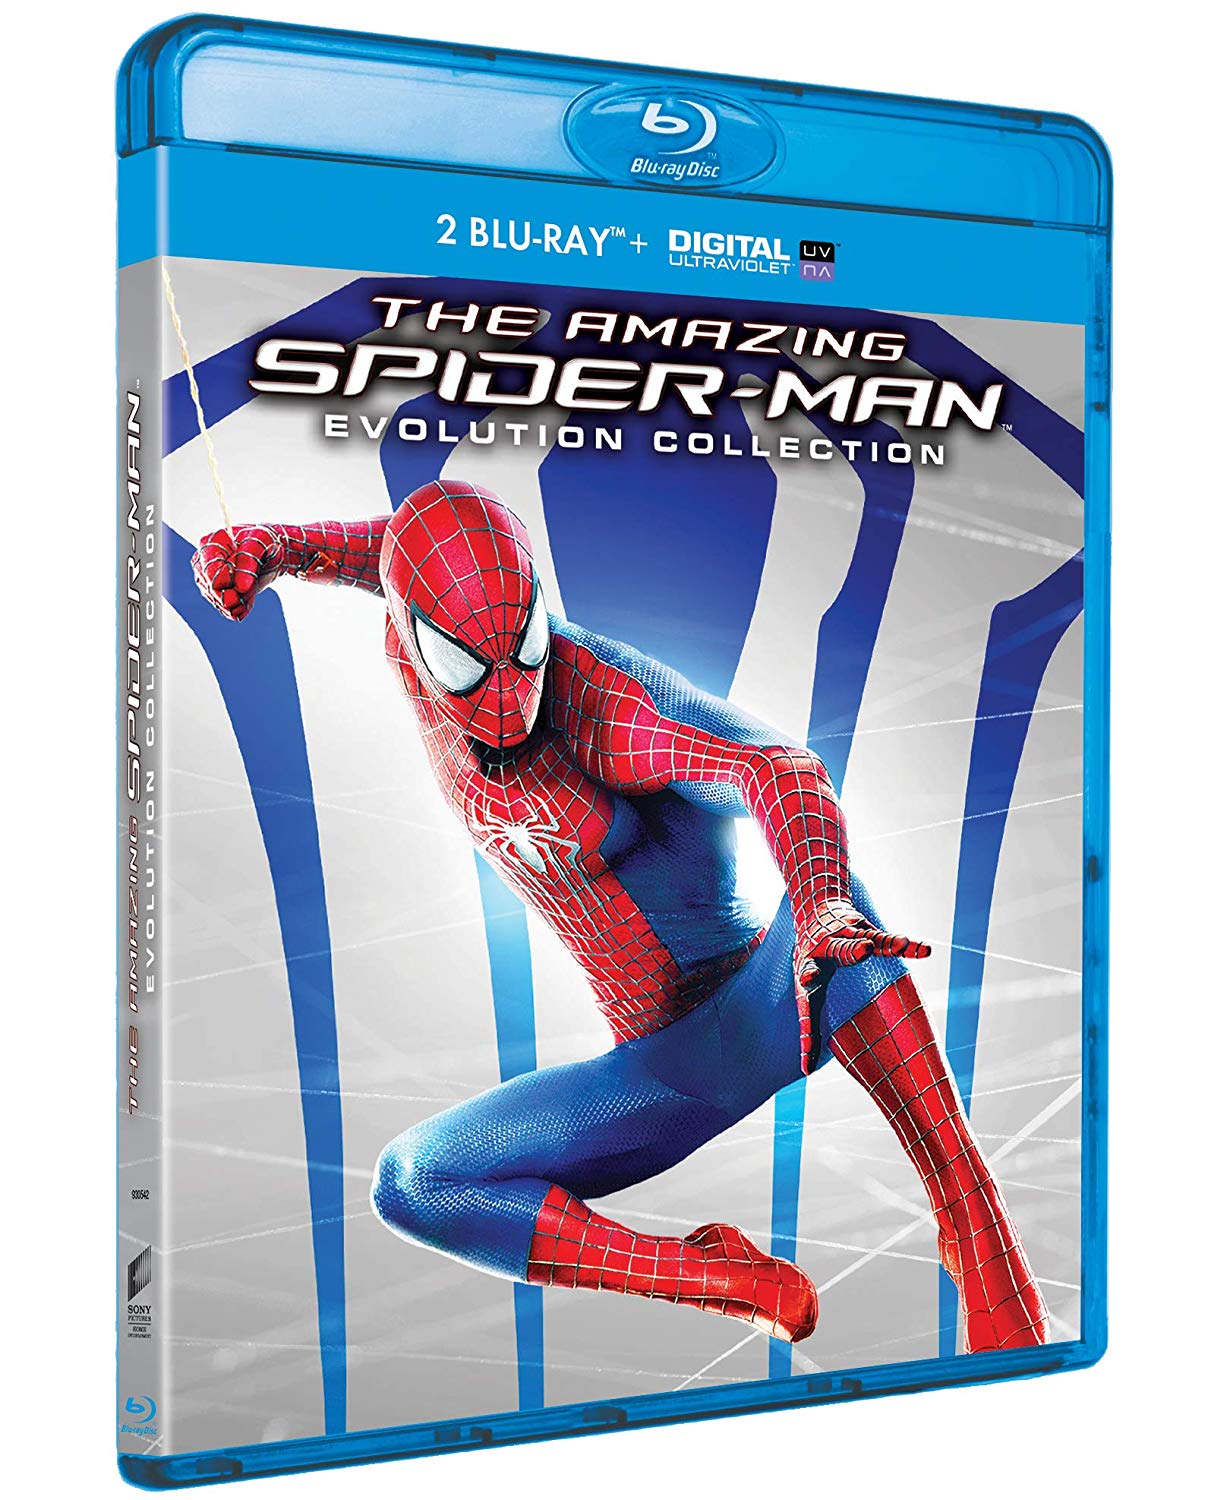 AMAZING SPIDER-MAN (THE) - EVOLUTION COLLECTION (2 BLU-RAY)